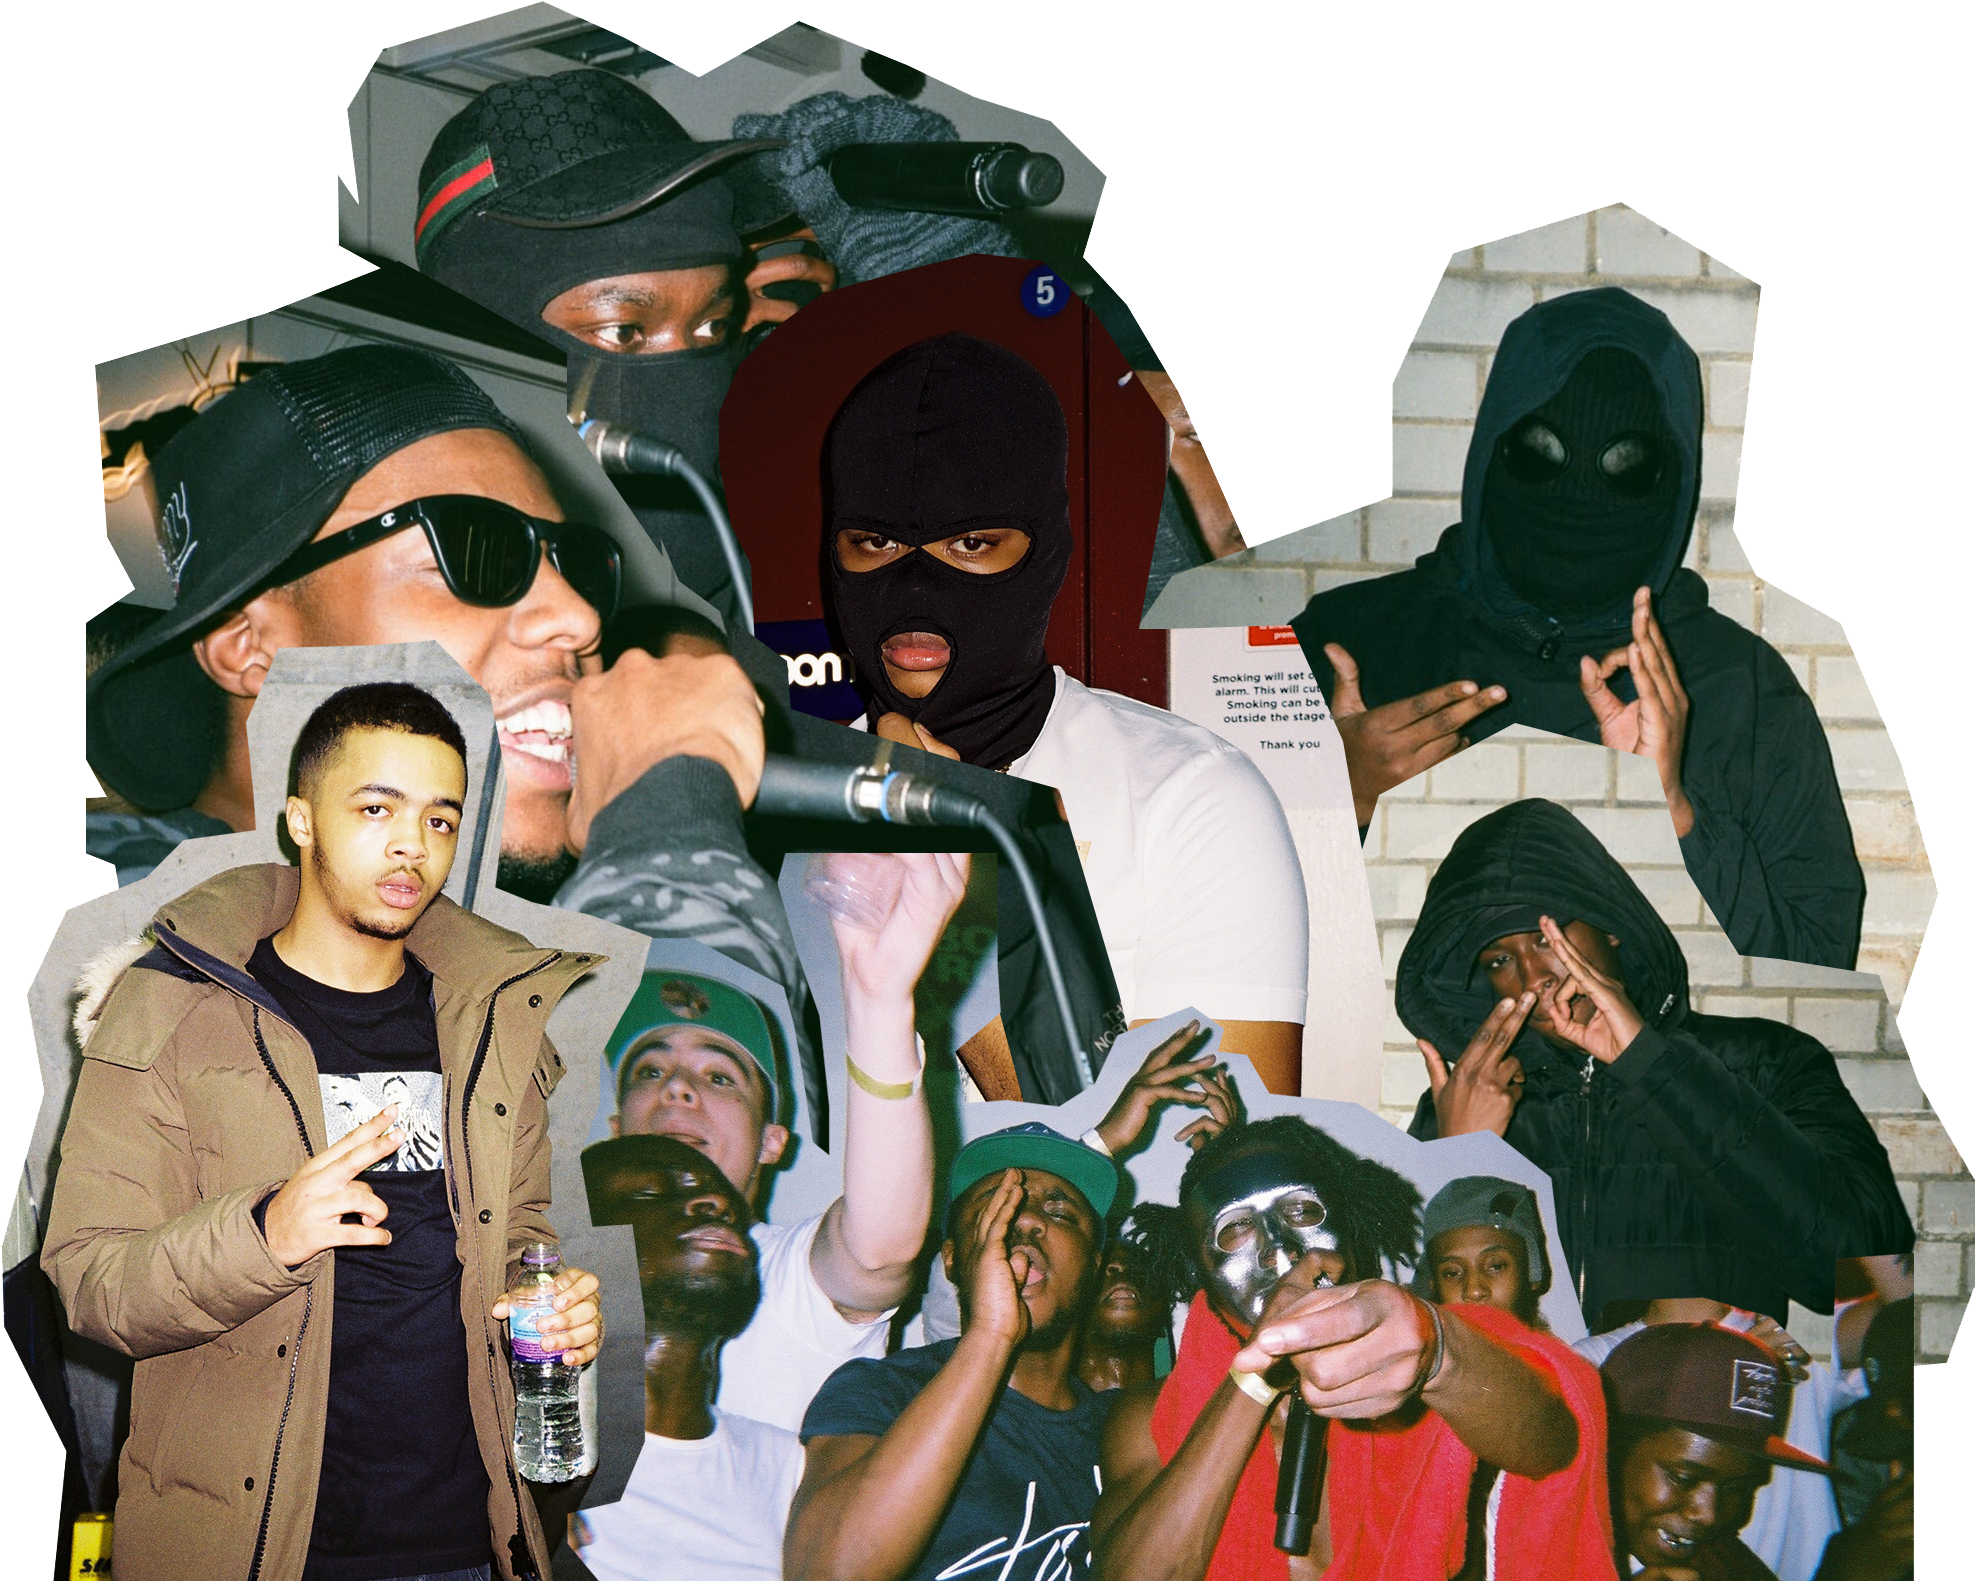 A Collage Of A Man With A Mask